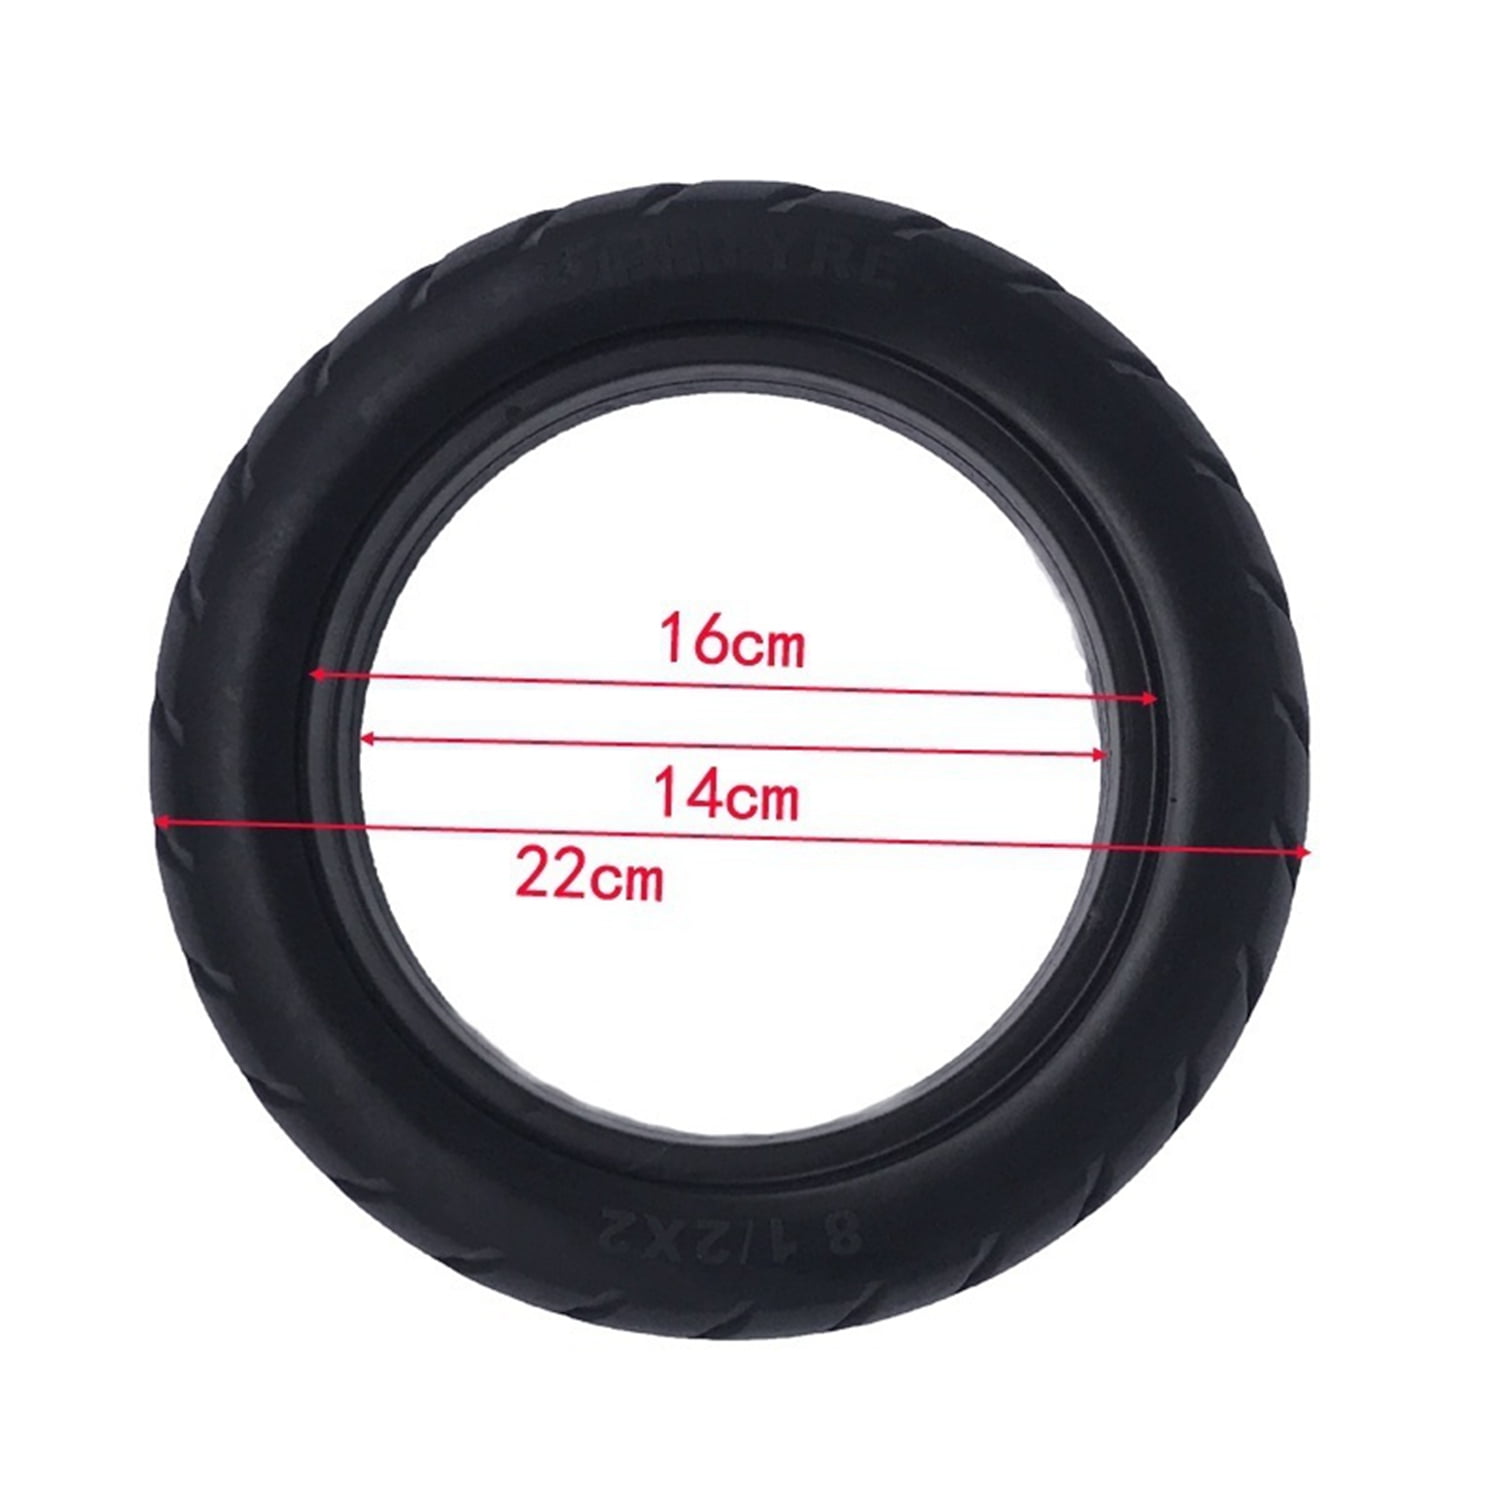 Scooter Tire Vacuum Solid Tyre 8 1/2X2 For Xiaomi M365 Electric Skateboard D281 